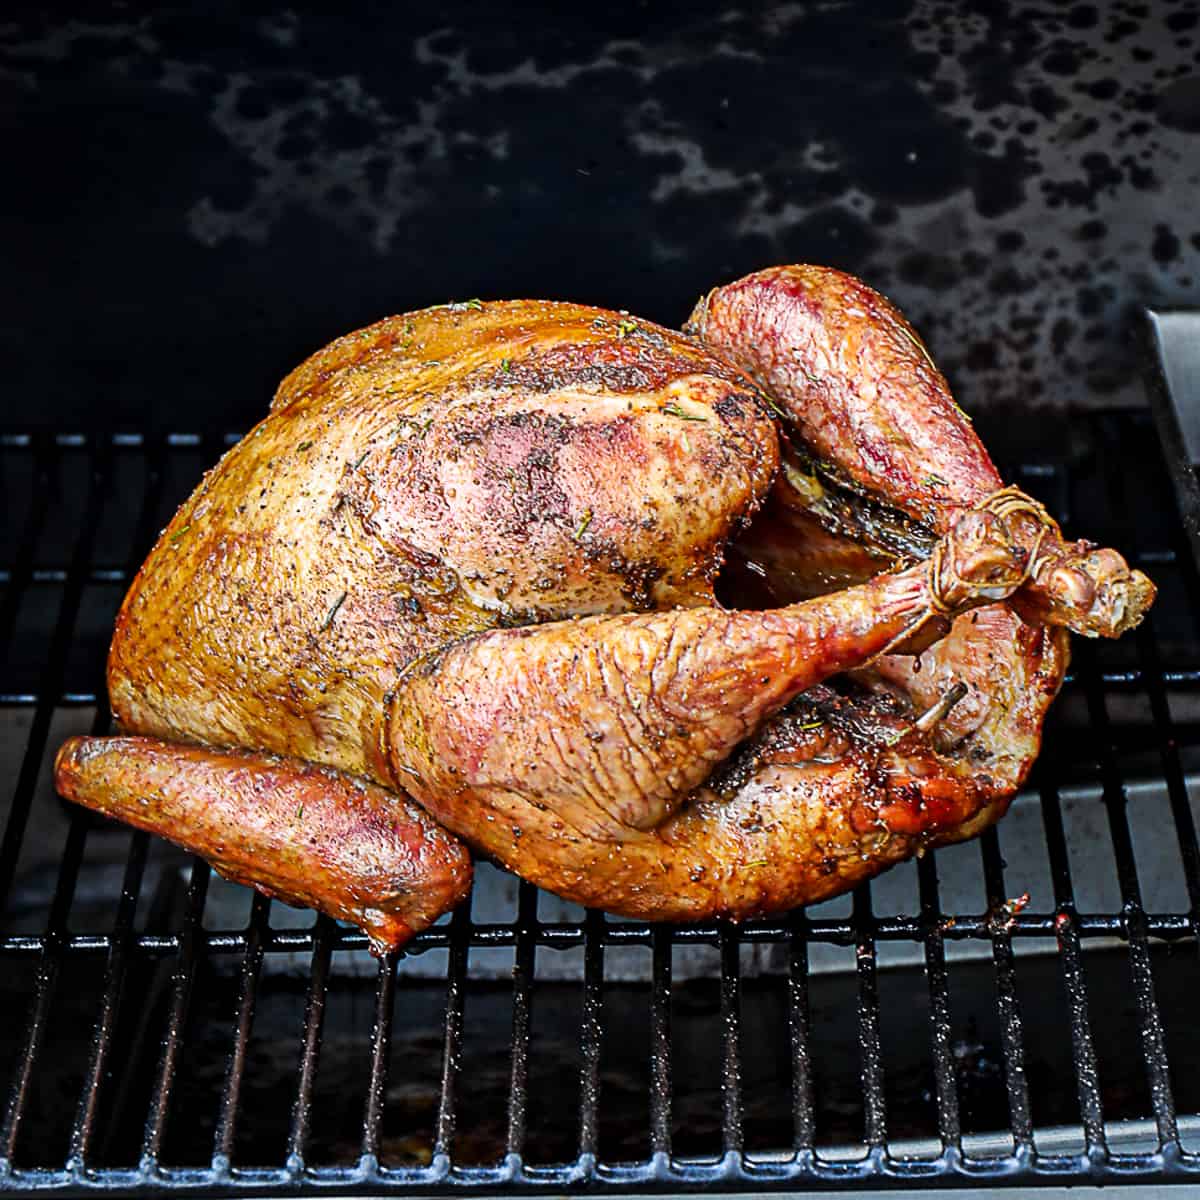 How to make Smoked Turkey Recipe on a Traeger BBQ Pellet Grill